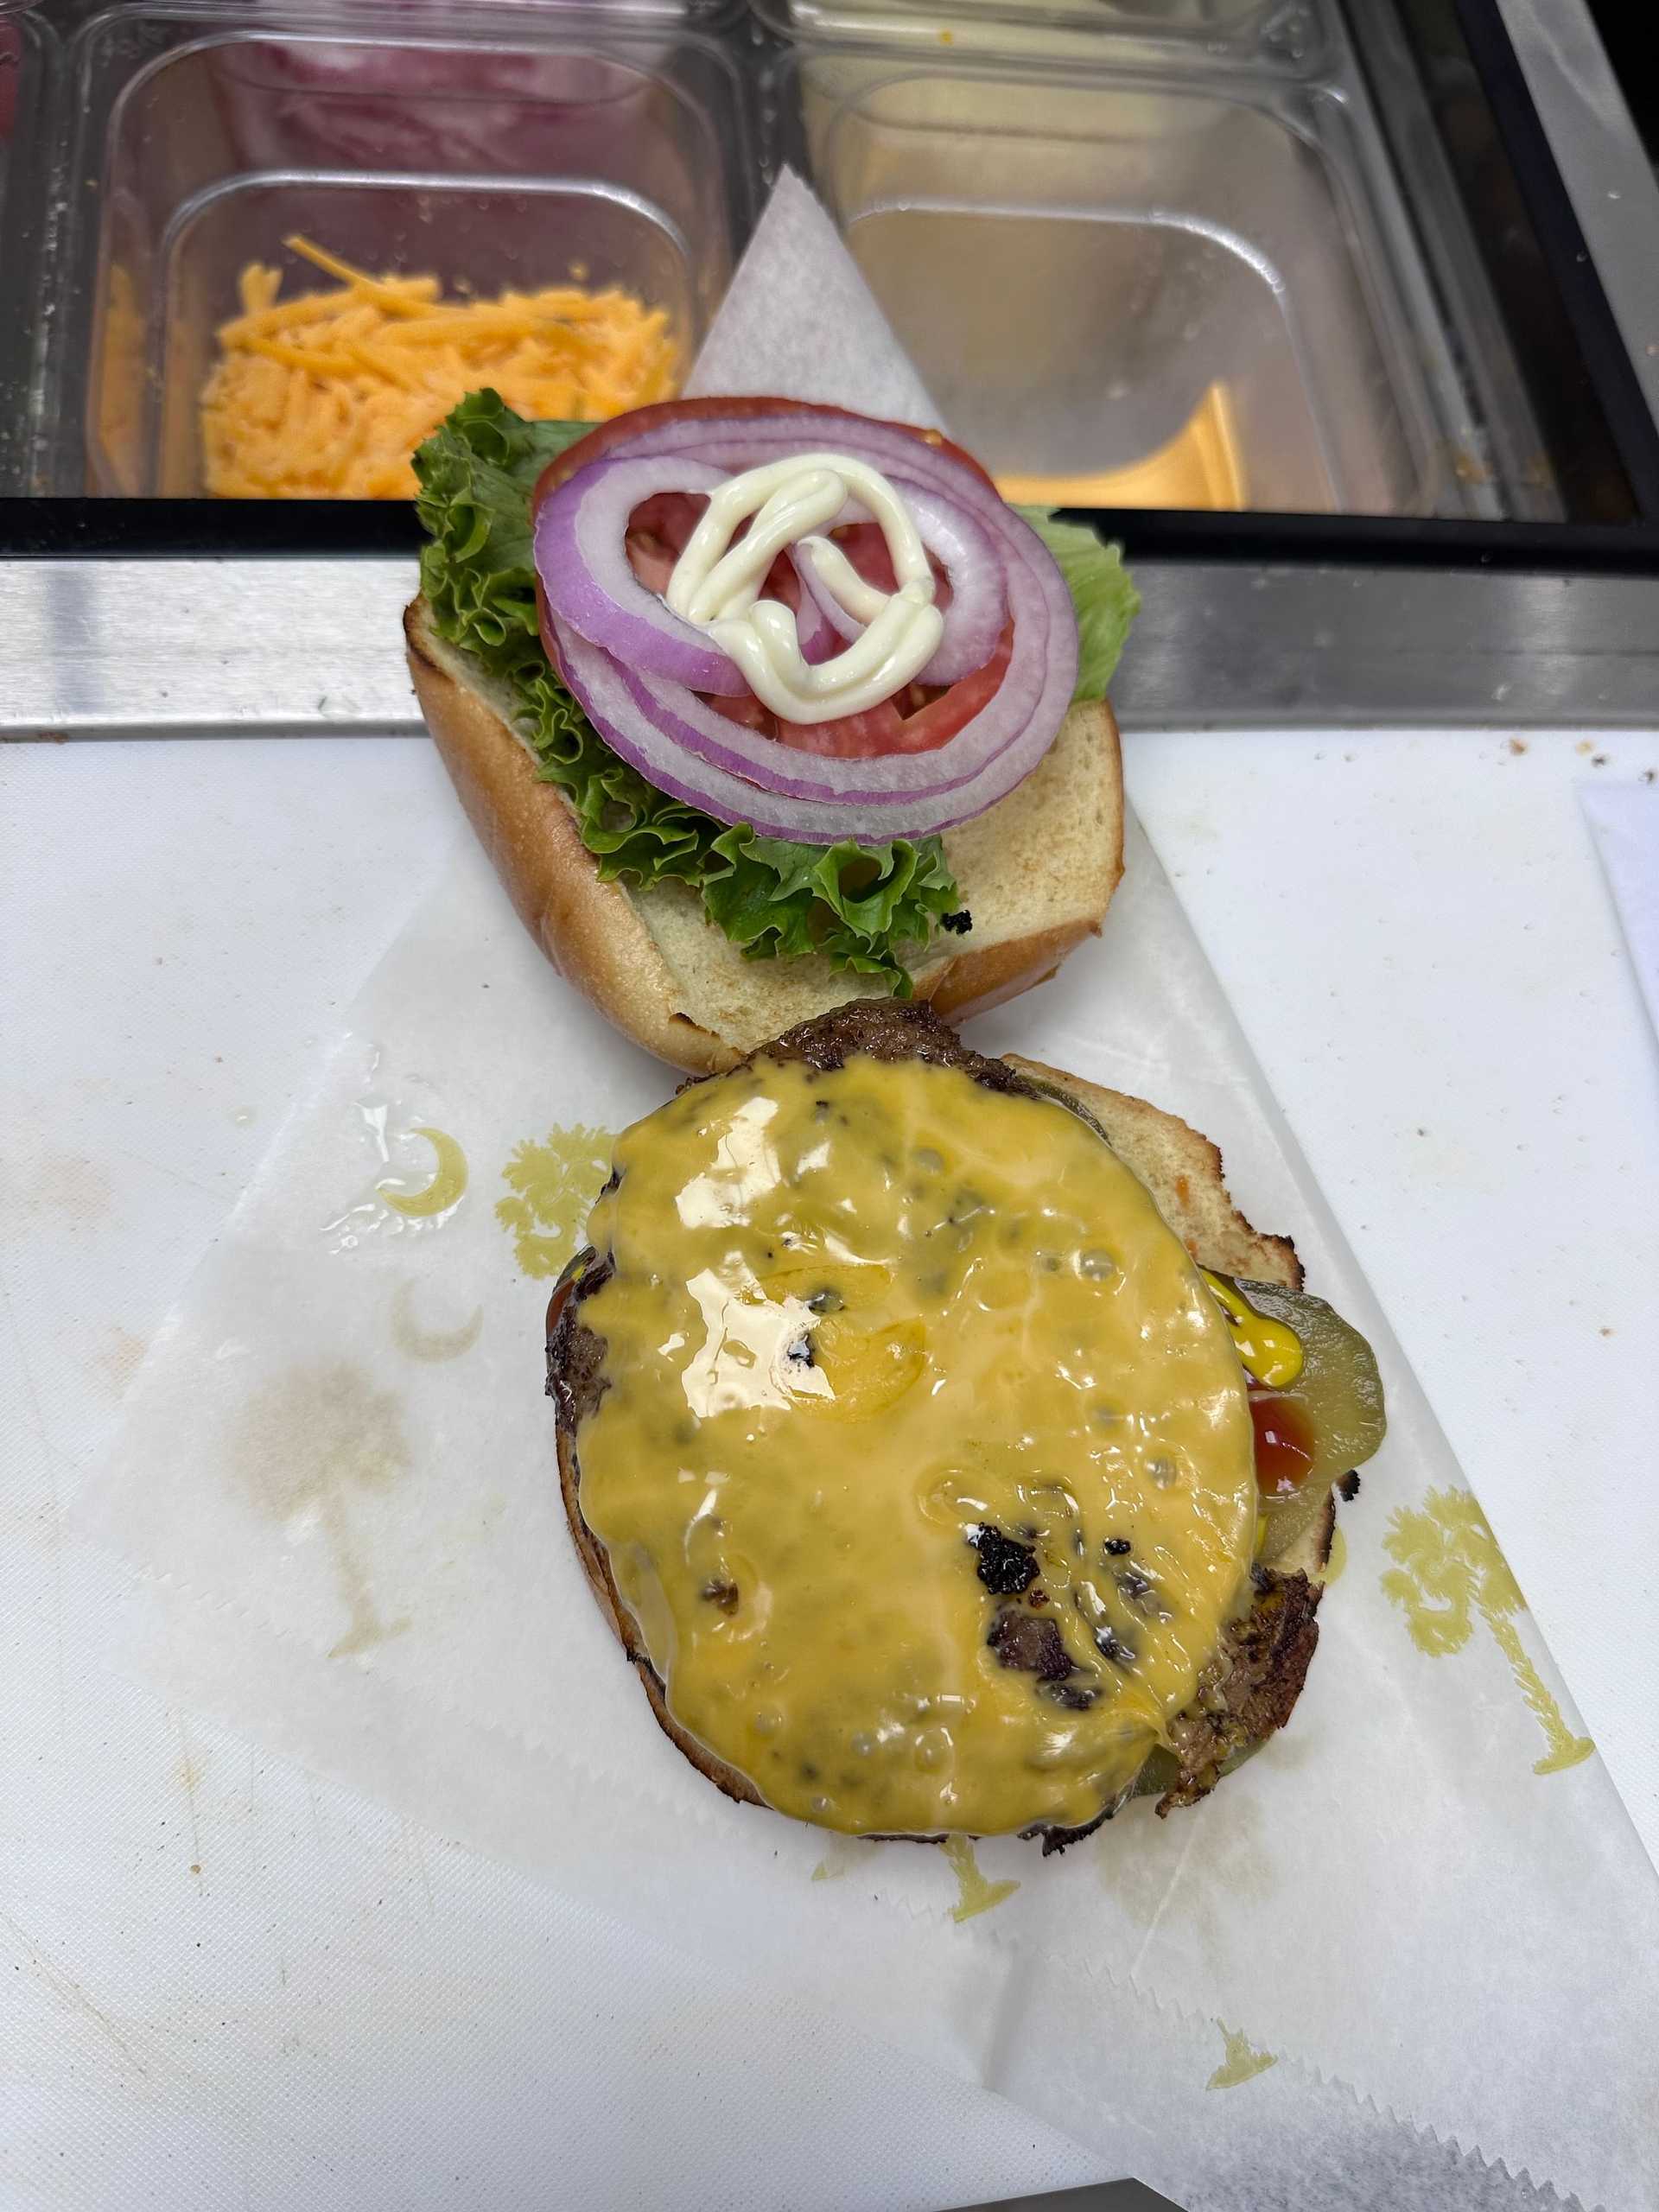 Open cheeseburger being prepared with melted cheese, lettuce, onions, tomato, and mayo on a bun.